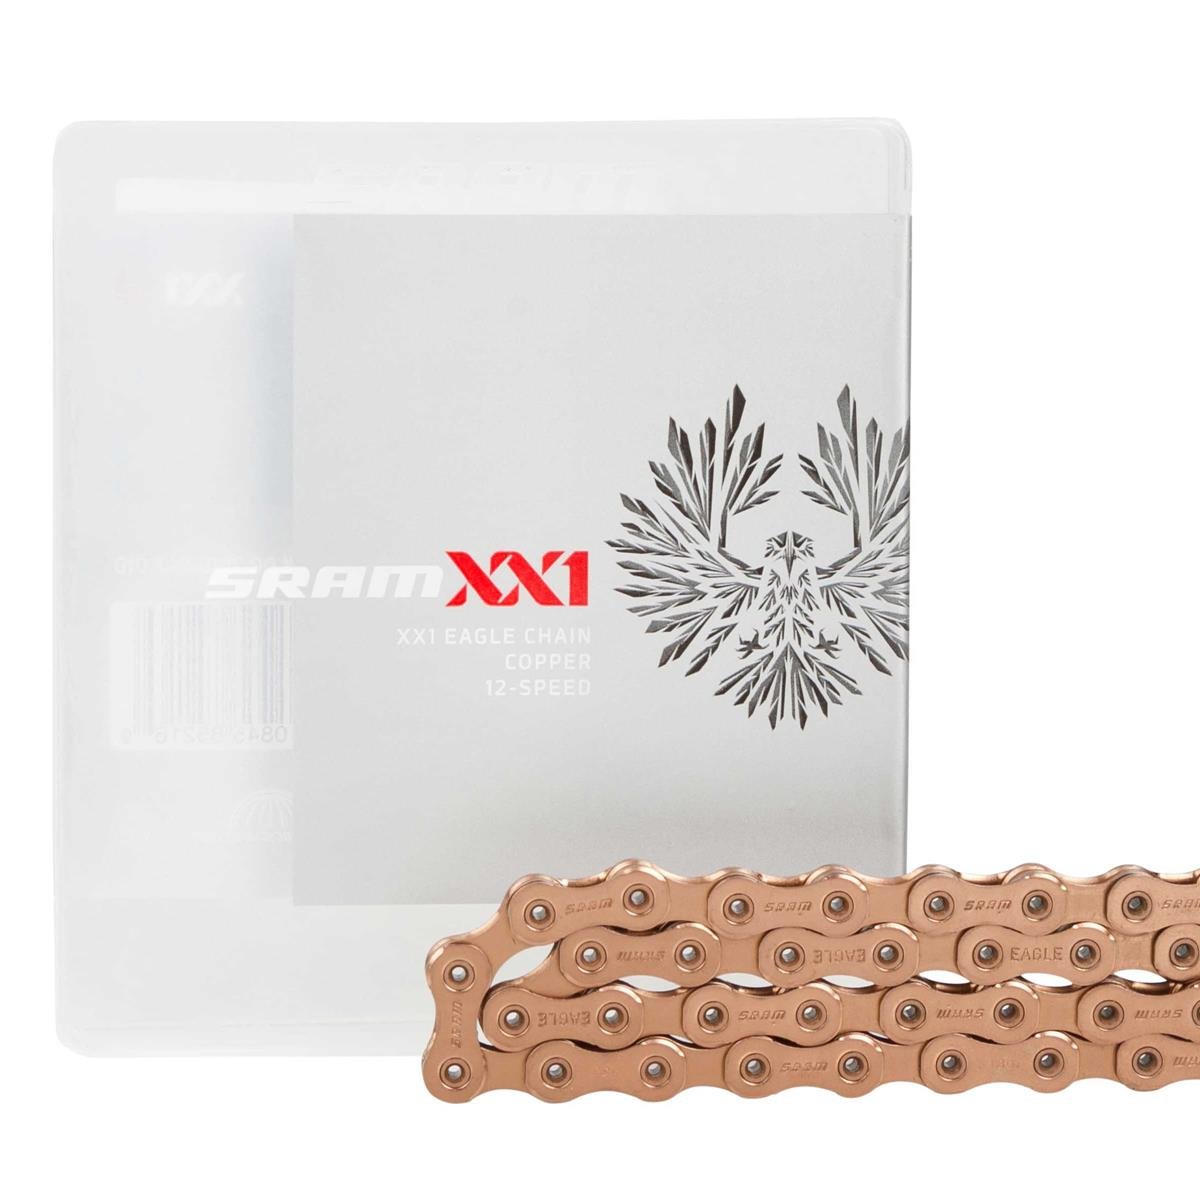 SRAM XX1 Eagle Chain - 12-Speed, 126 Links, Copper Chains 710845852169